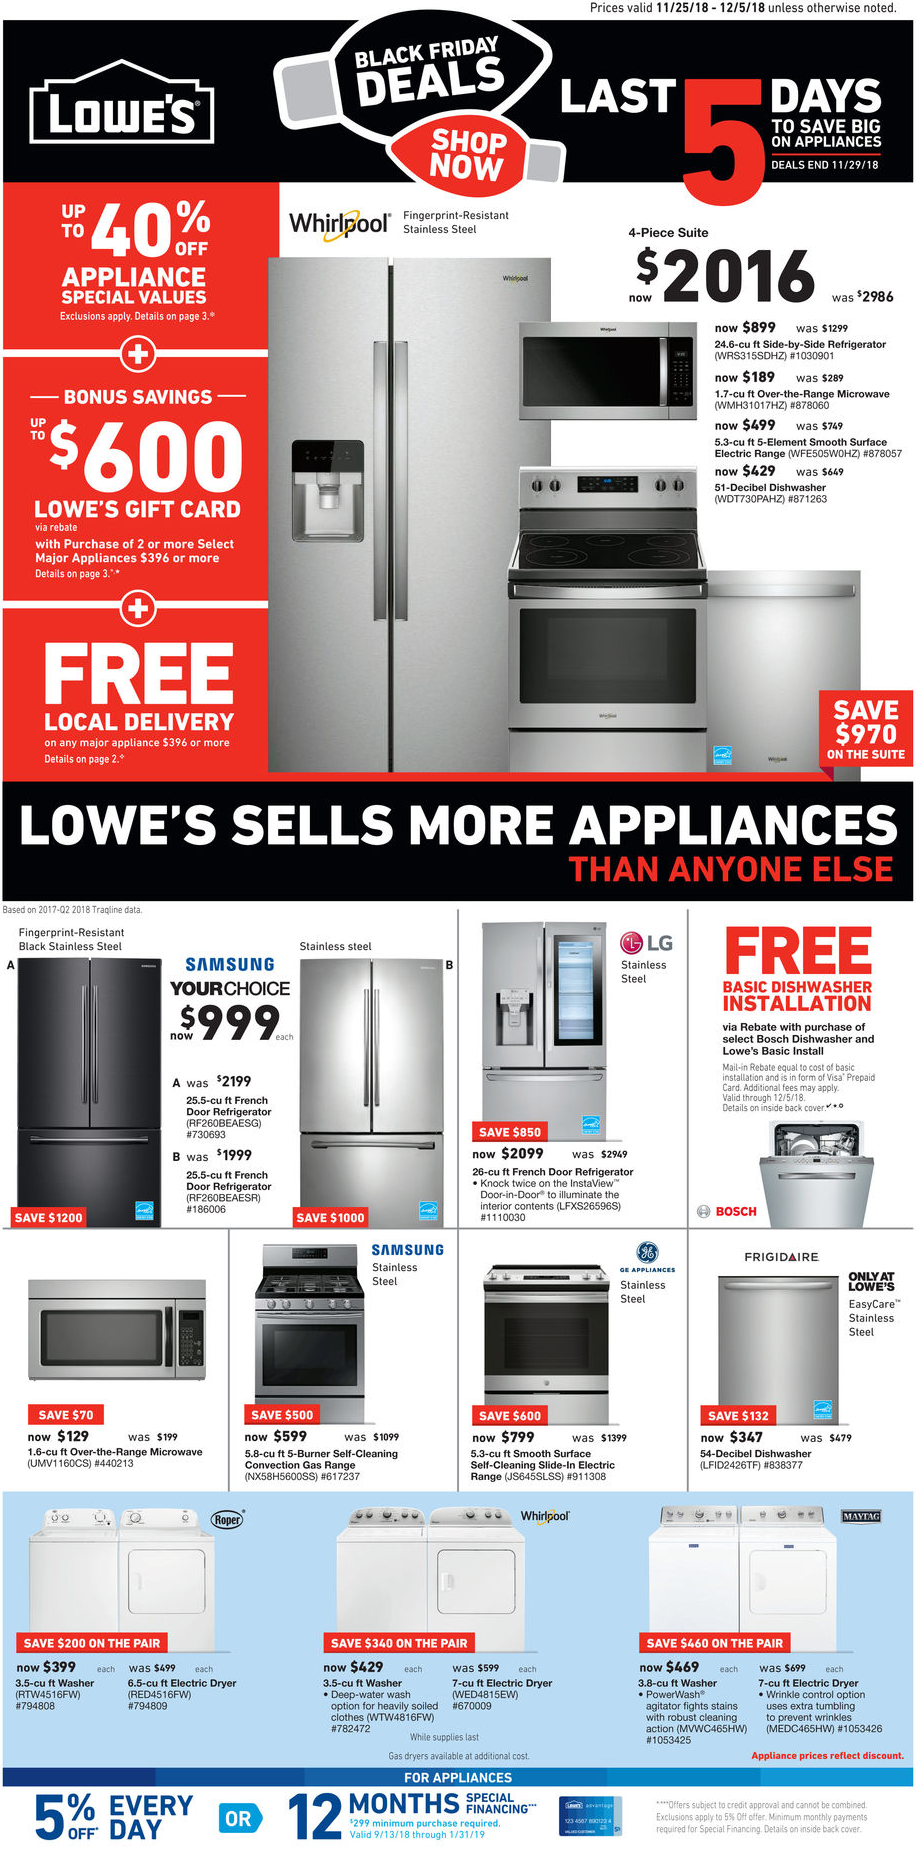 Lowe's 2018 Cyber Monday Ad